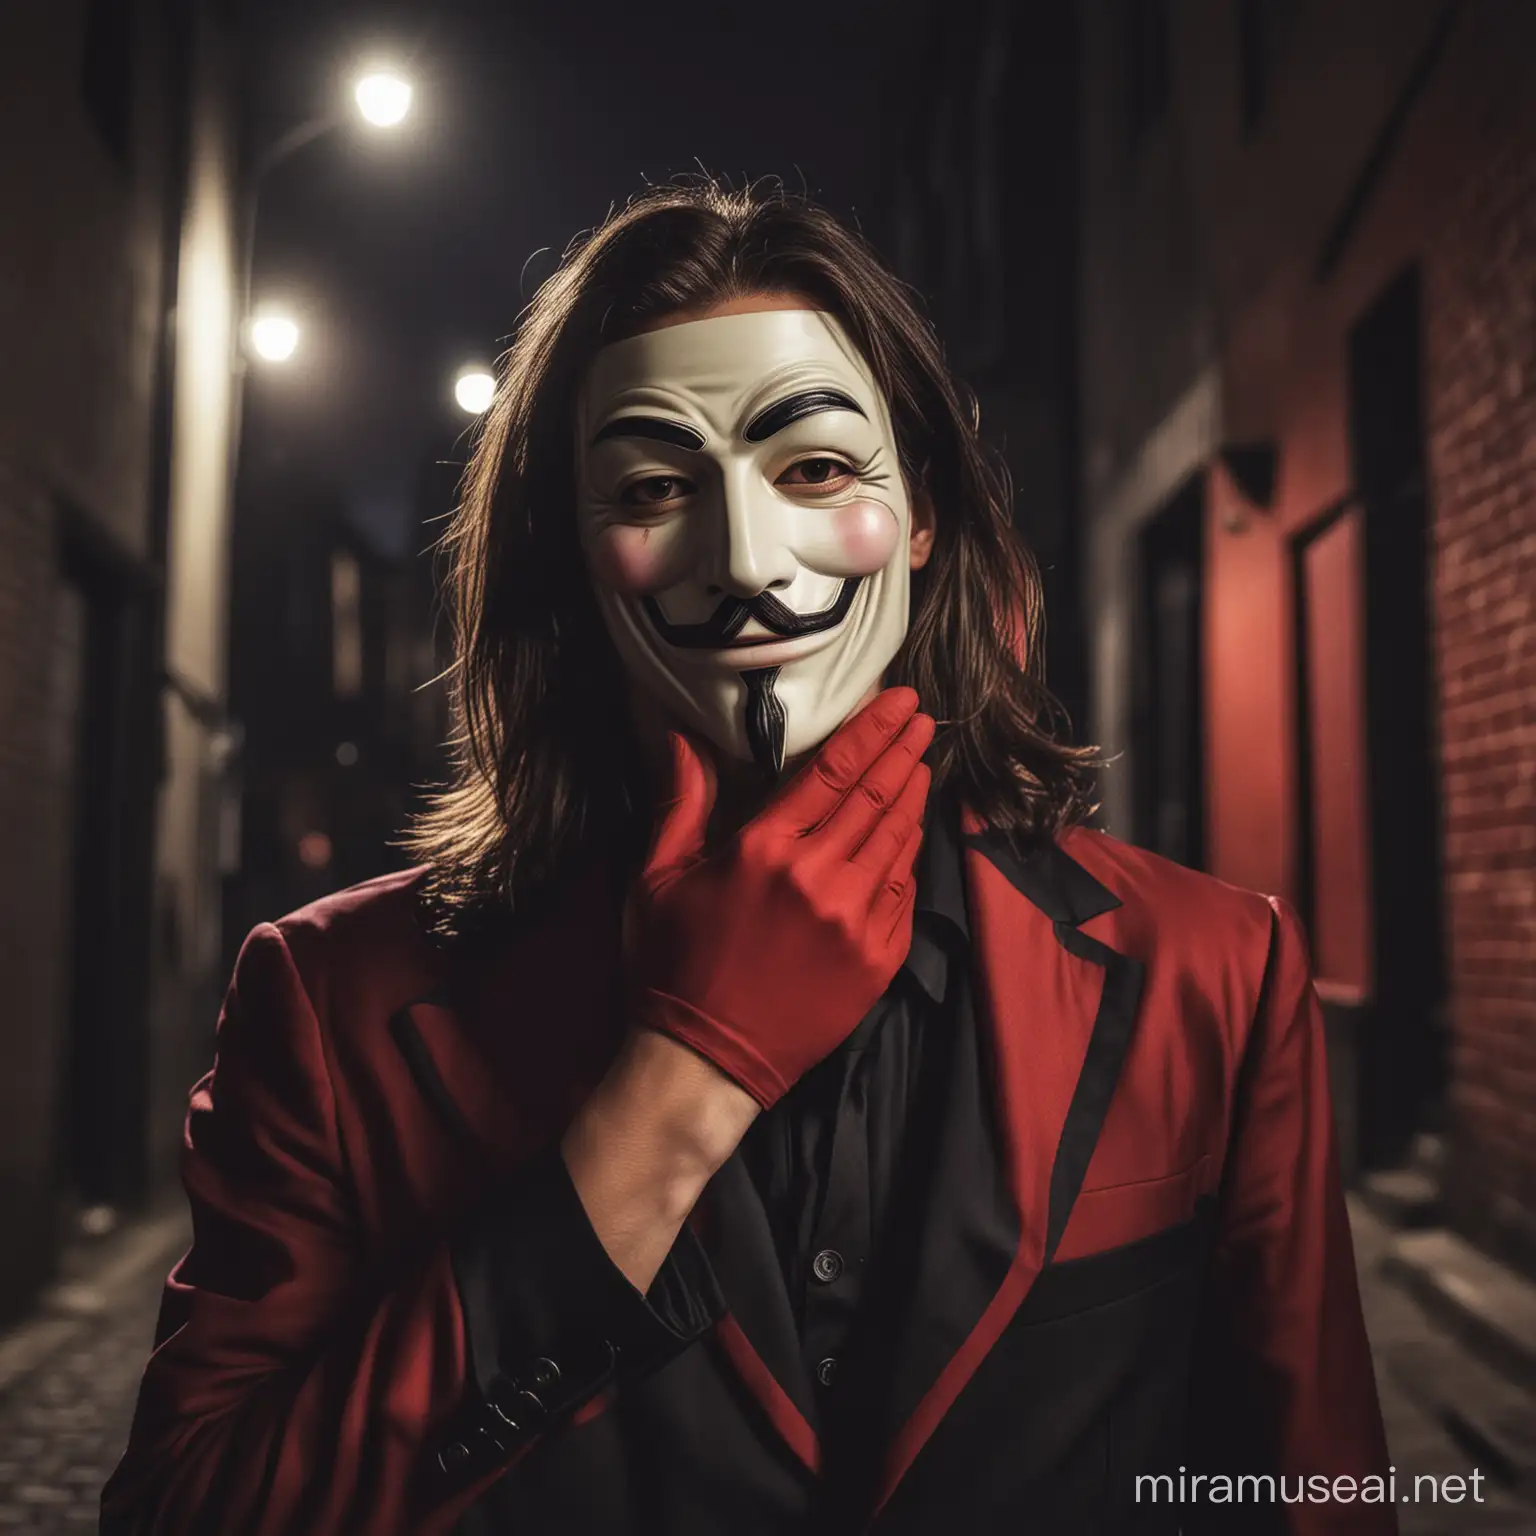 Draw a close-up shot of a person with V For Vendetta makeup (Guy Fawkes style) with hand over mouth in silence gesture (). They are wearing a black and red suit. Focus on the face and upper body only. Make the background interesting, such as a busy street or a dark room with dim lighting. Make sure all fingers are complete.